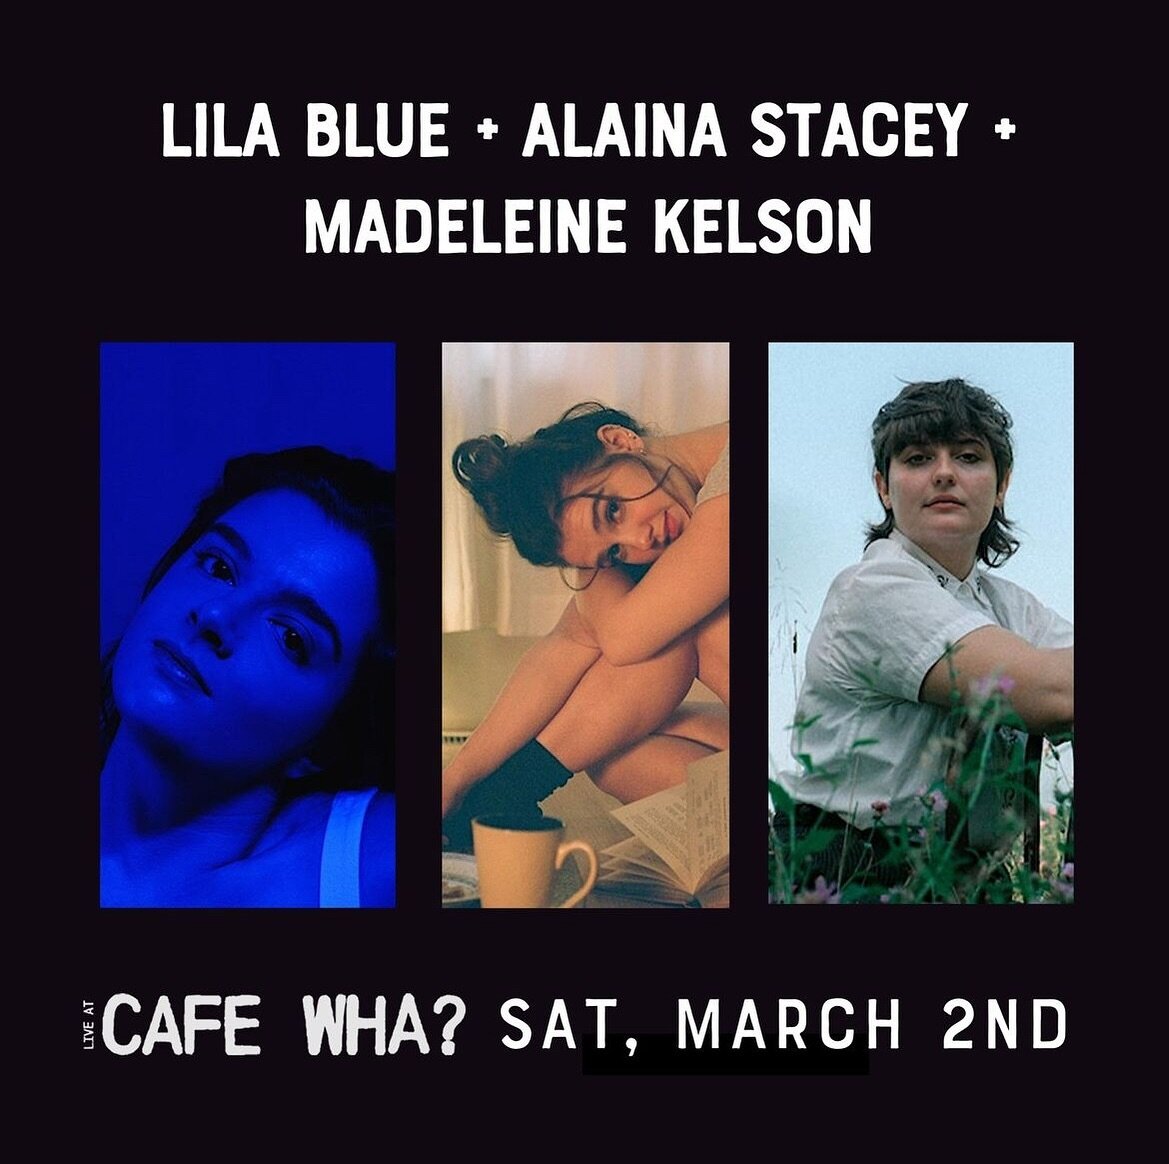 NYC!! We will be in you!! I&rsquo;m so so so excited to return to one of my favorite cities of all time with my old friend @madeleinekelson and my new friend @lilabluemusic ✨💙 tickets on sale now for @cafewha!!